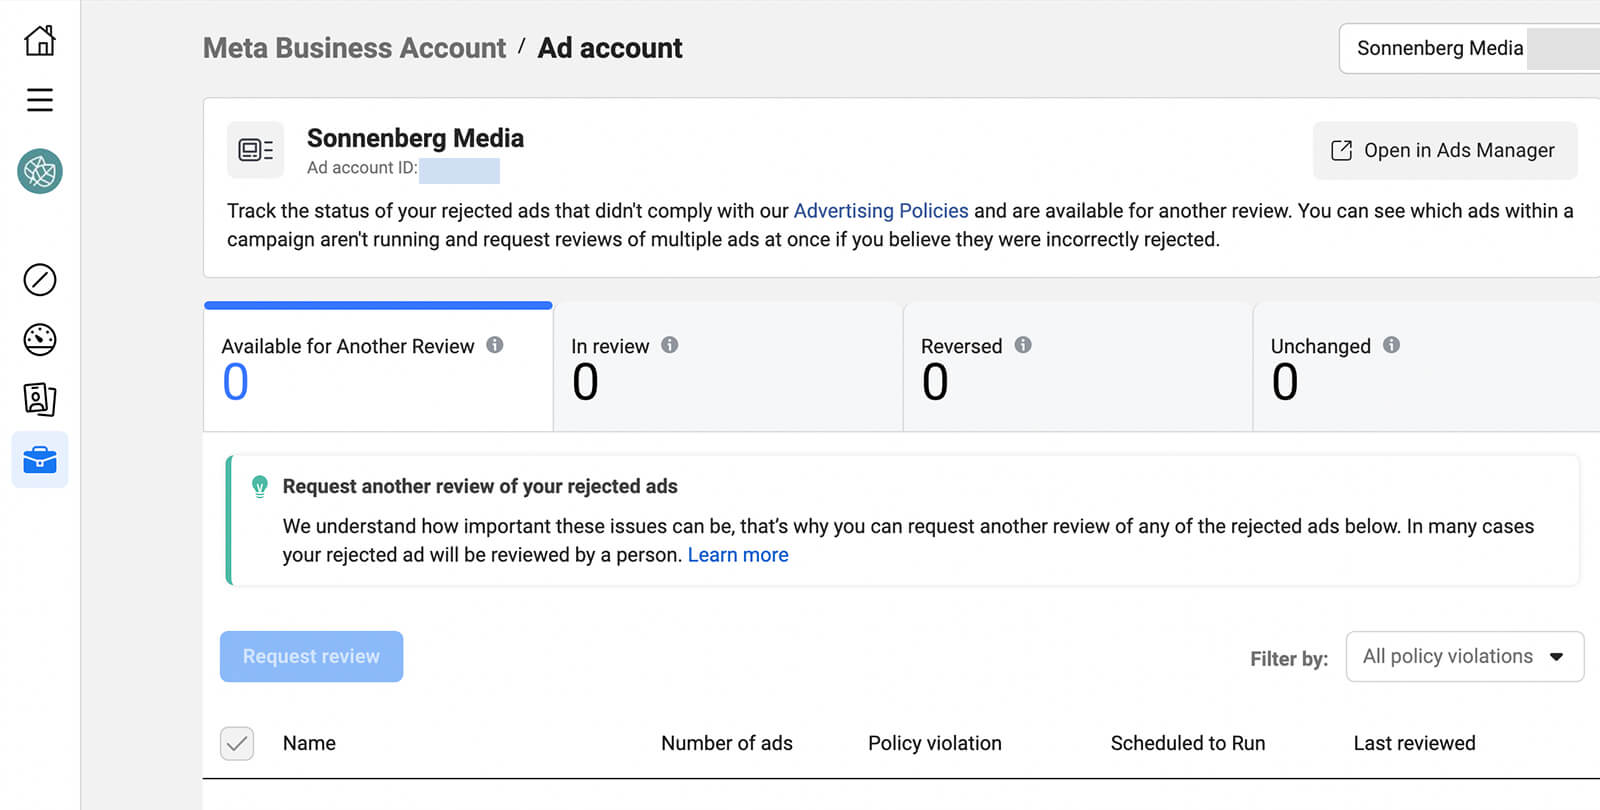 what-happens-when-your-facebook-ad-copy-uses-prohibited-words-policy-violation-details-sonnenberg-media-example-2